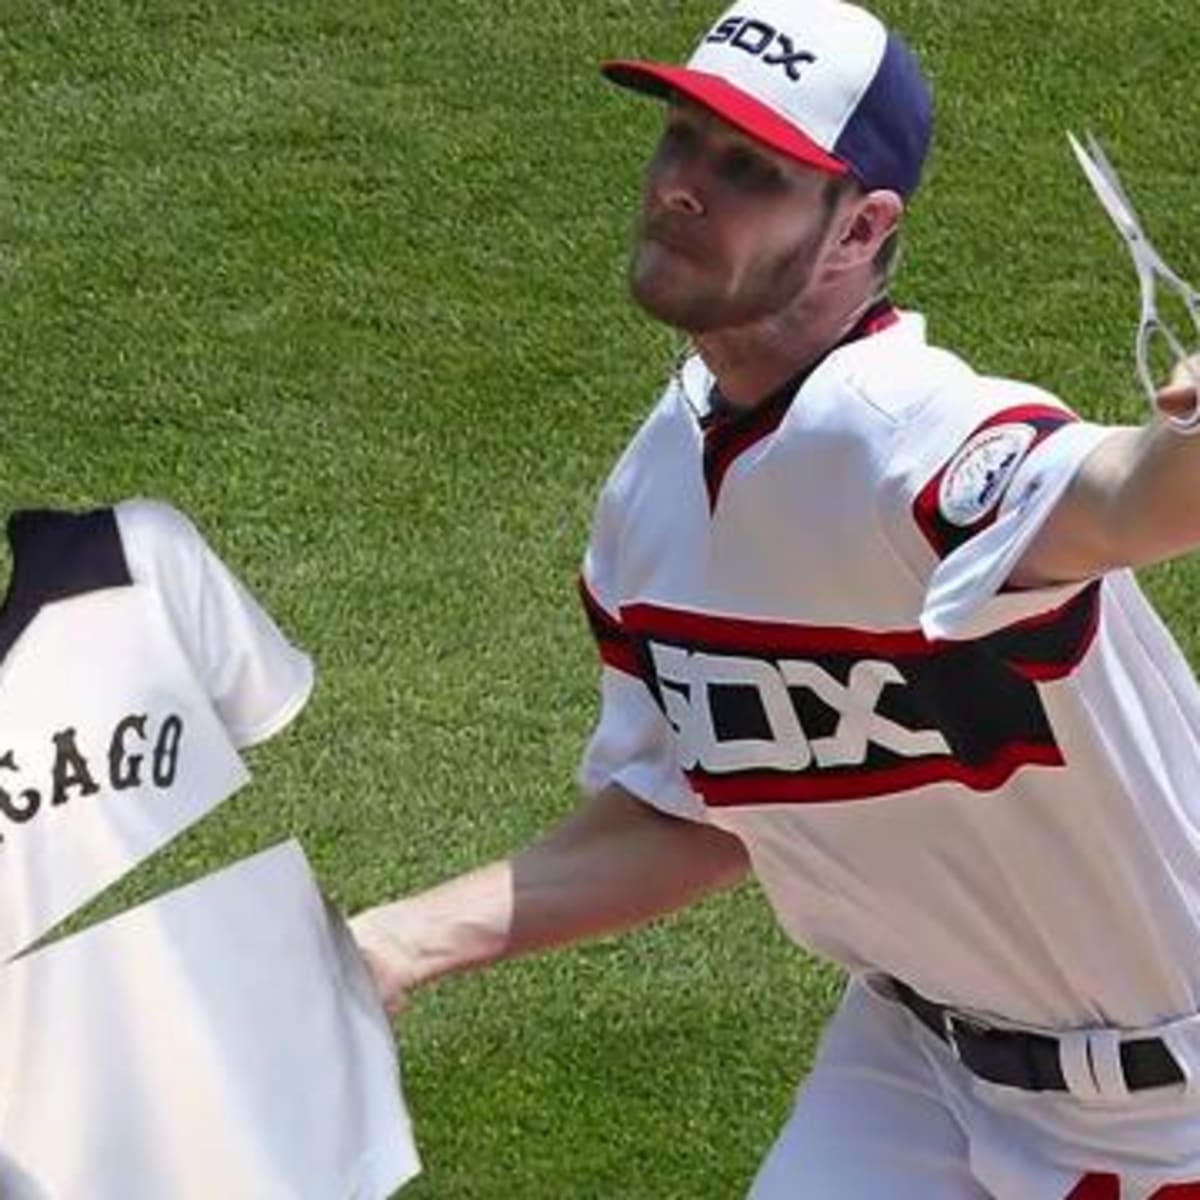 Chris Sale cut up all of the White Sox' throwback jerseys because